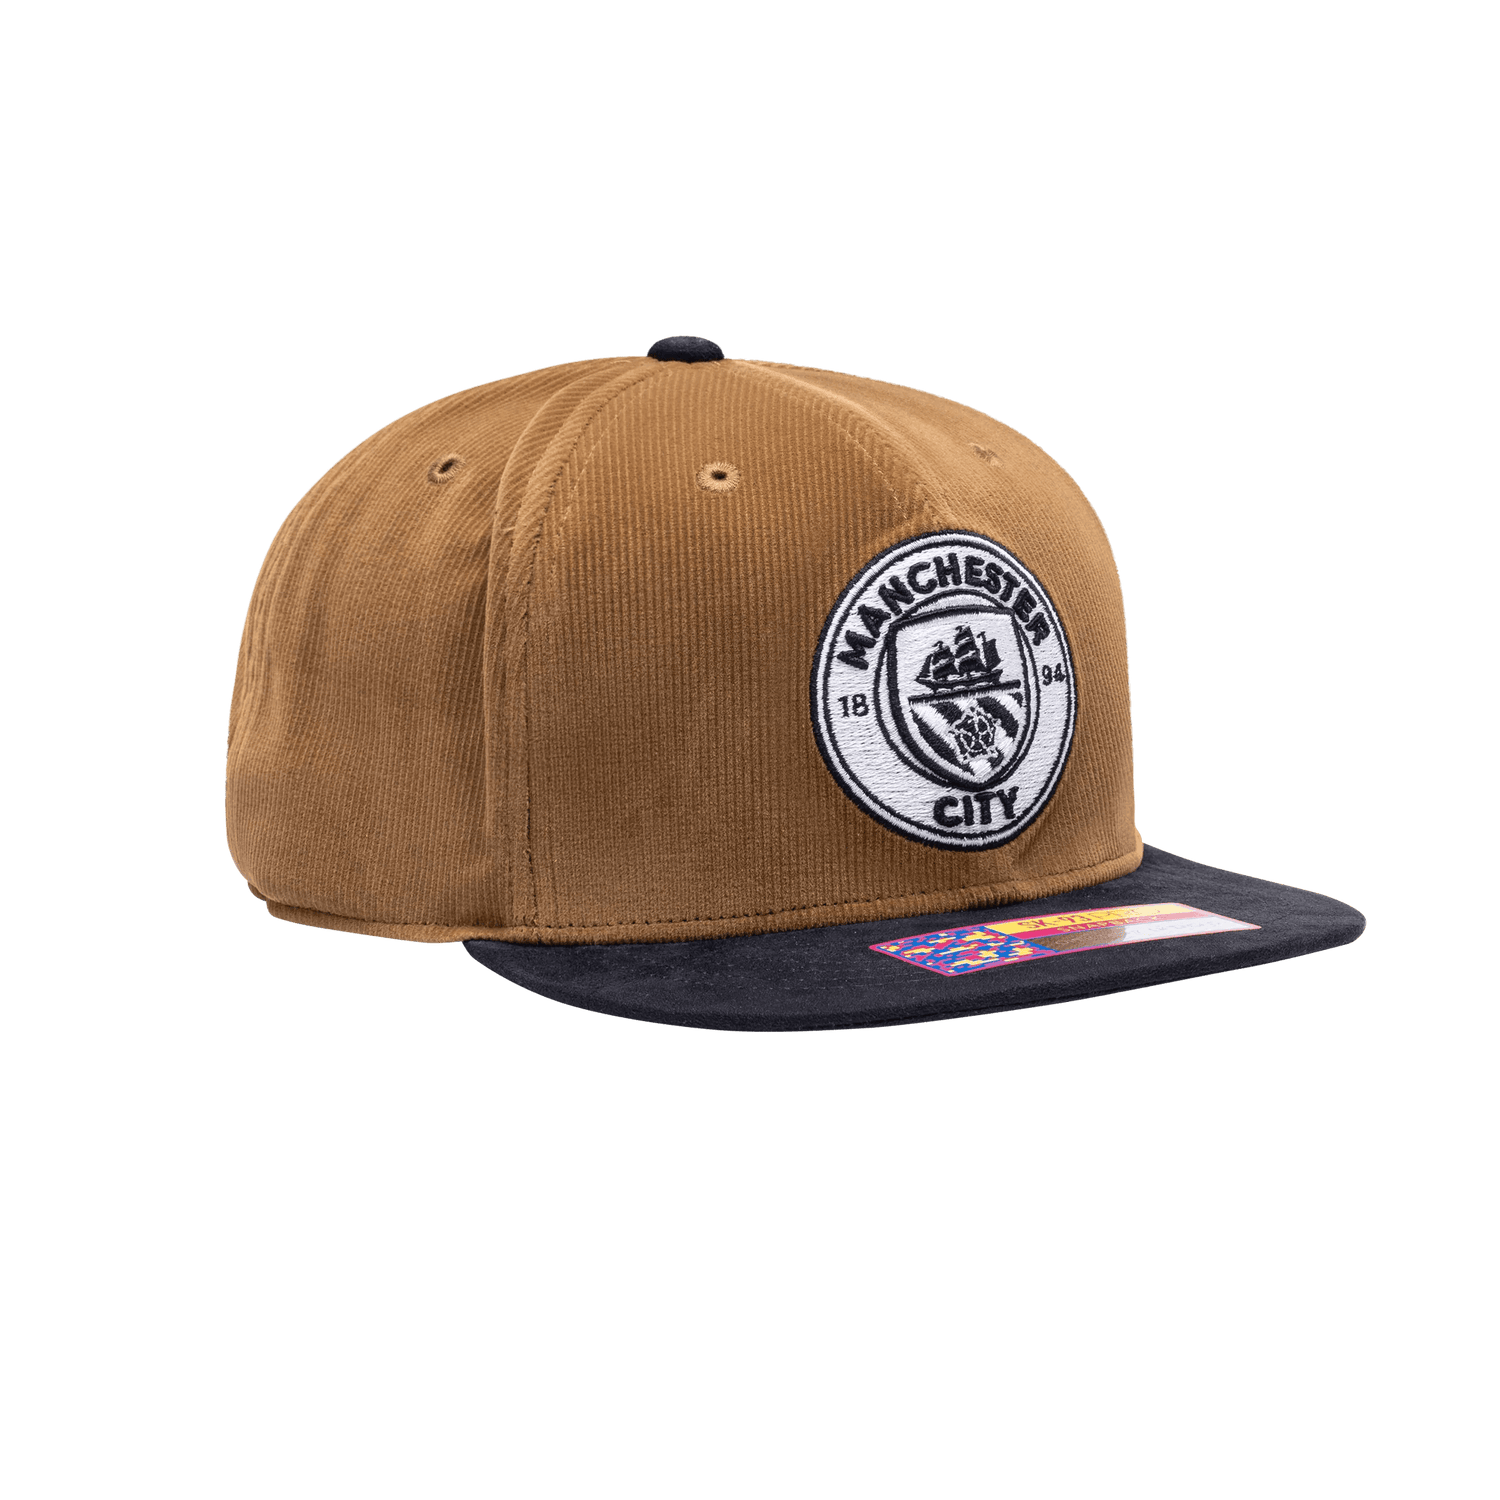 FI Collection Club Manchester City Cognac Snapback Hat (Lateral - Side 2)